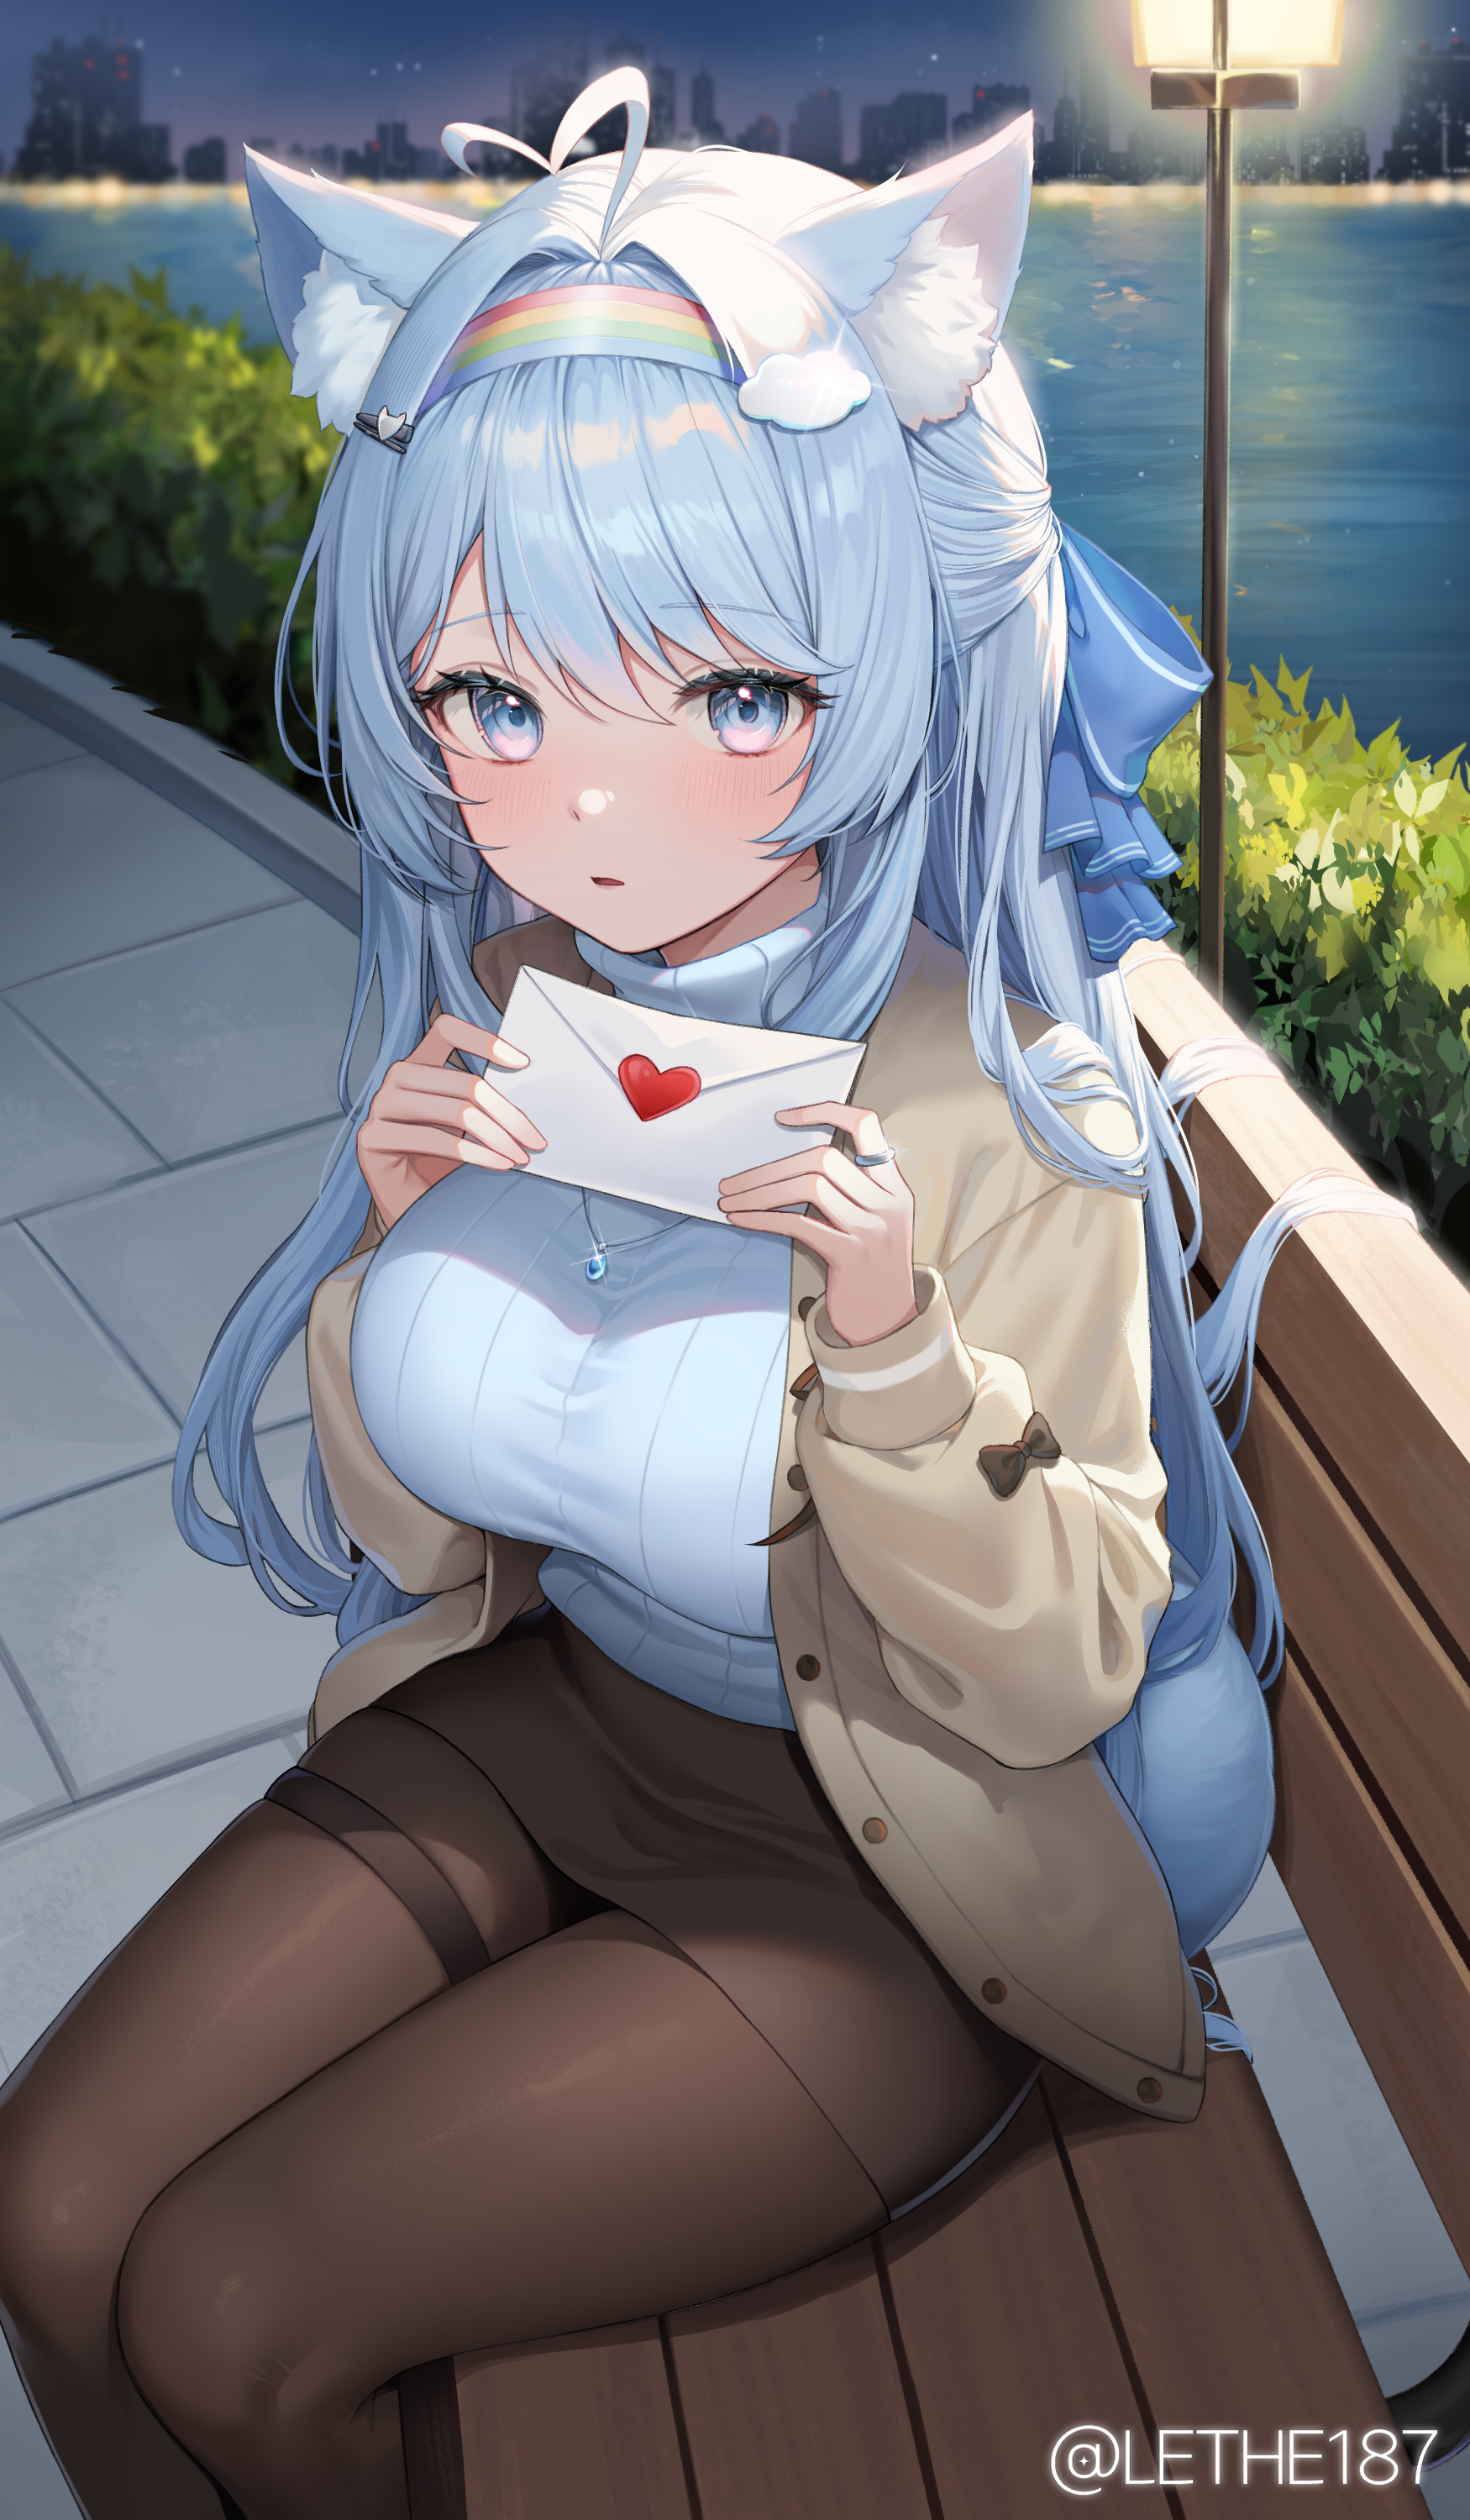 Anime 1750x3000 anime anime girls original characters Lethe letter animal ears bench sitting blue hair blue eyes long hair pantyhose portrait display rings turtlenecks blushing watermarked cat girl cat ears looking at viewer water night necklace